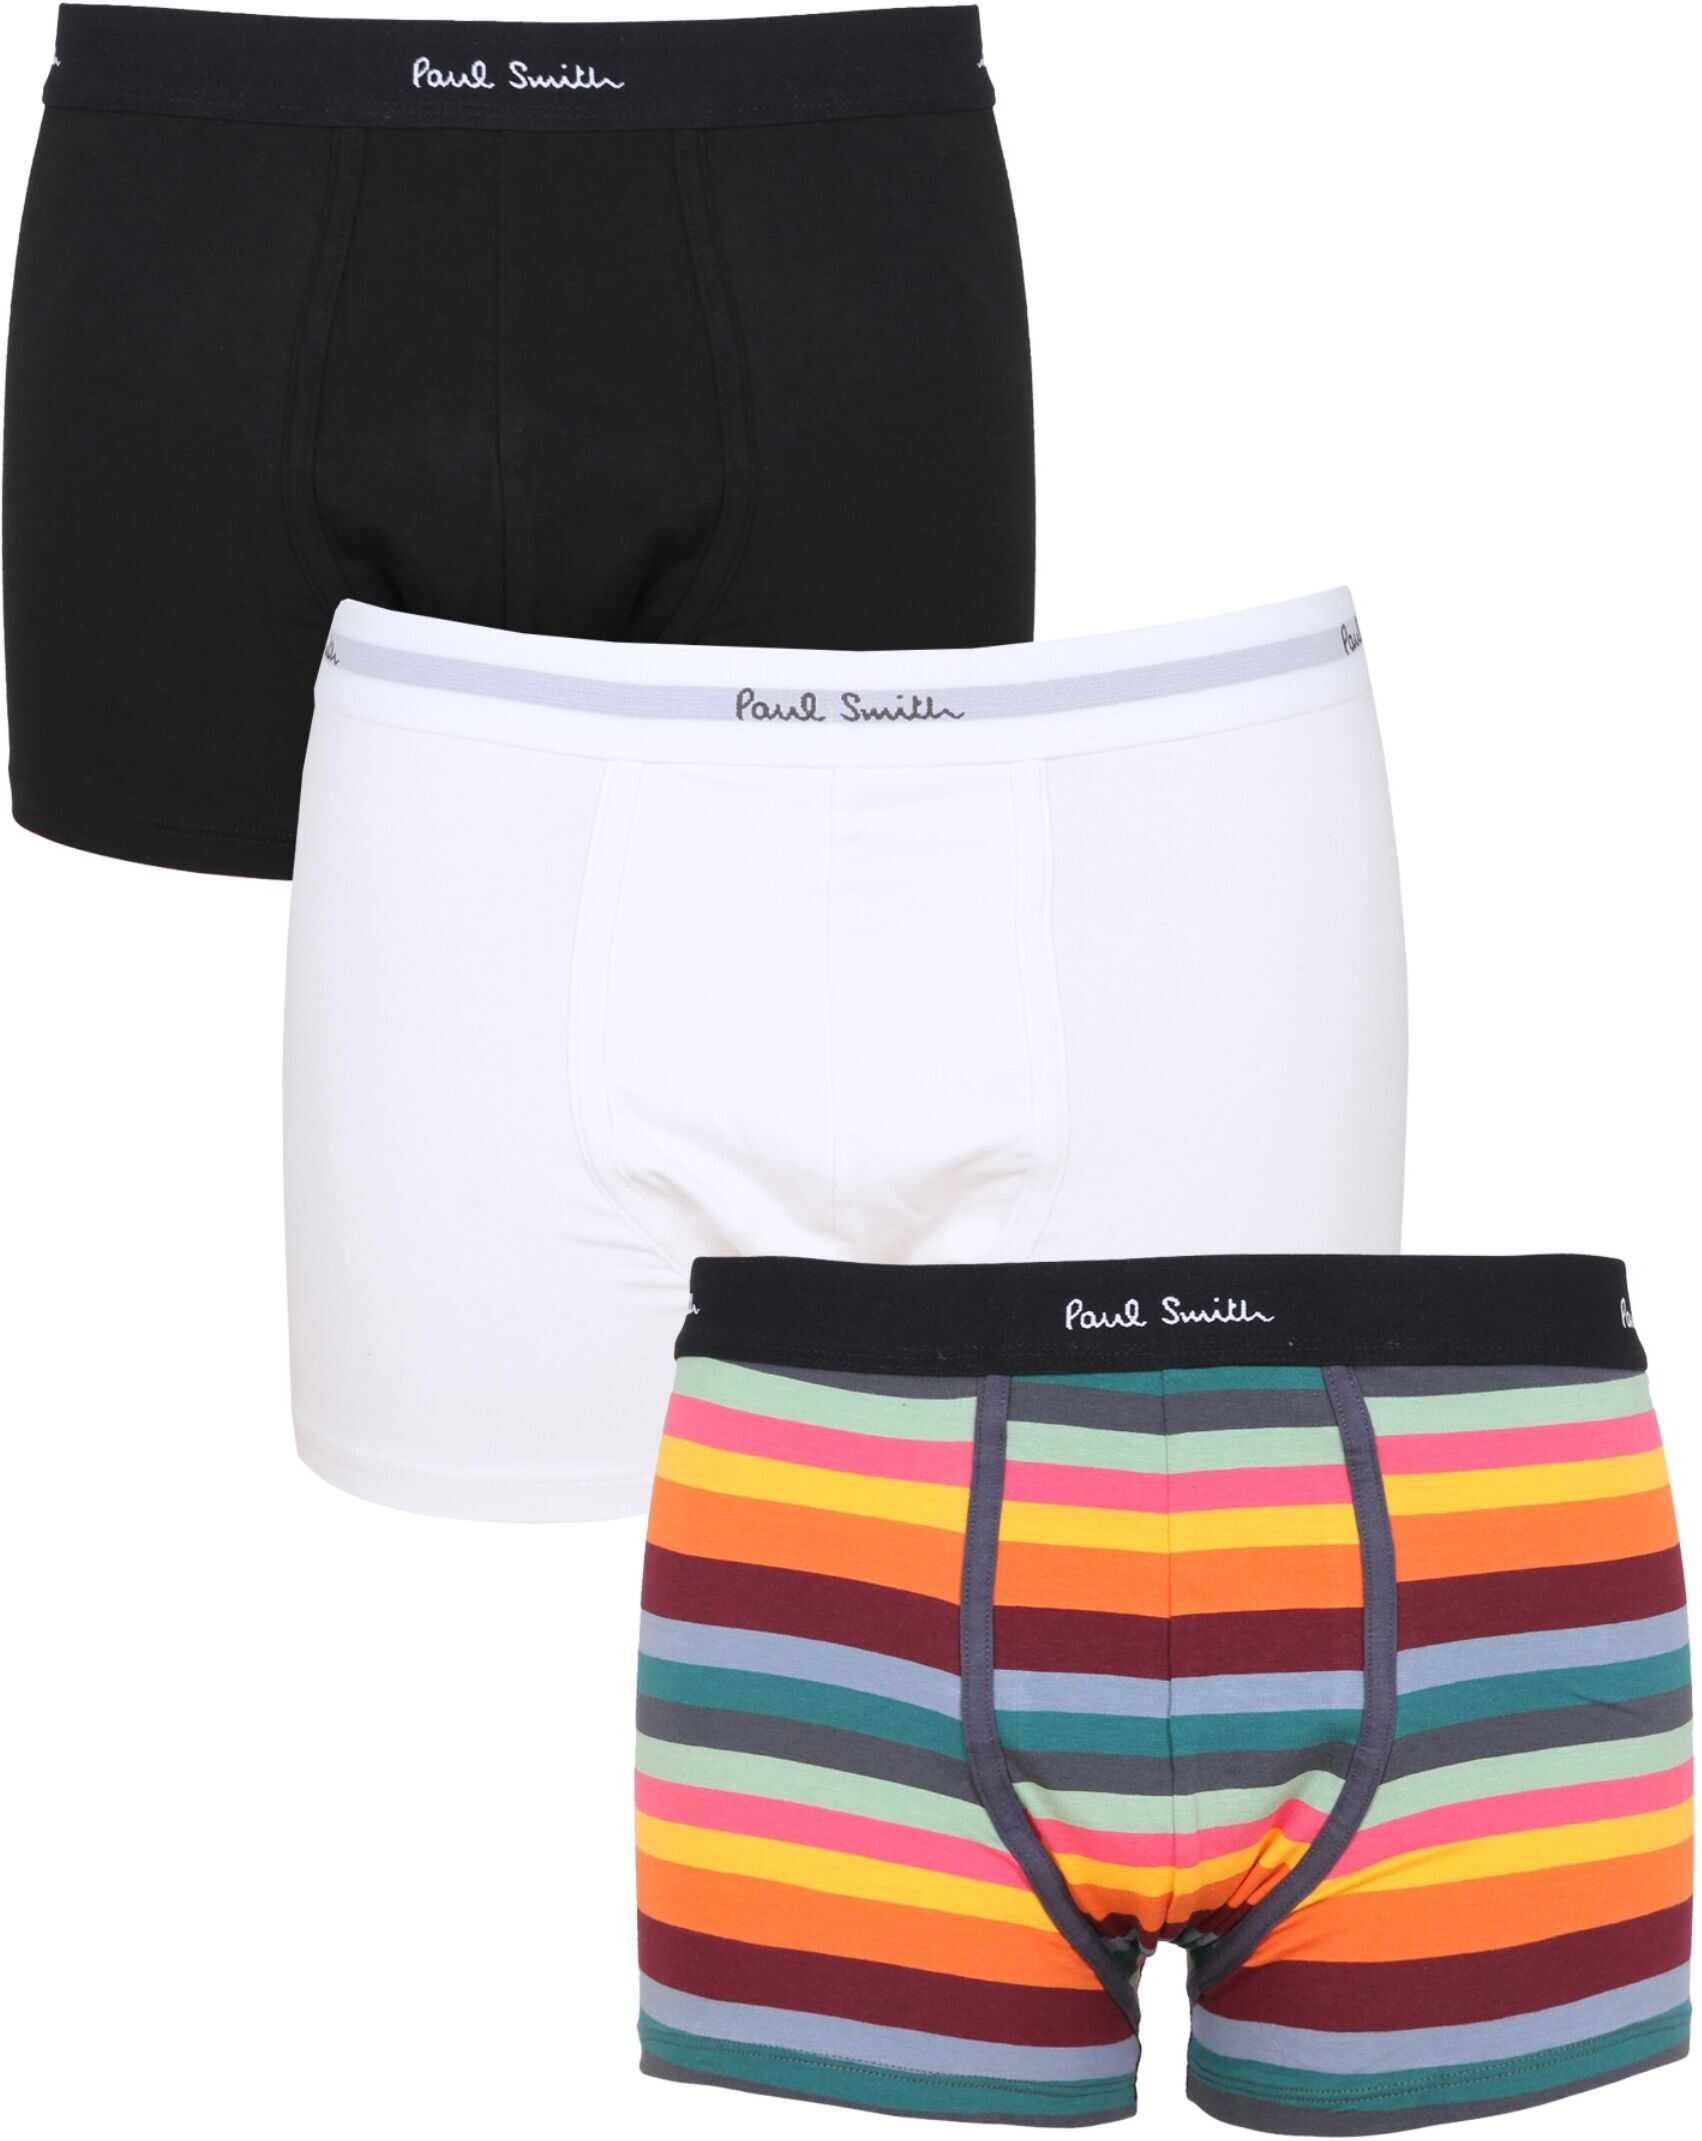 Paul Smith Pack Of Three Boxers M1A/914C/A3PCKE_01A MULTICOLOUR